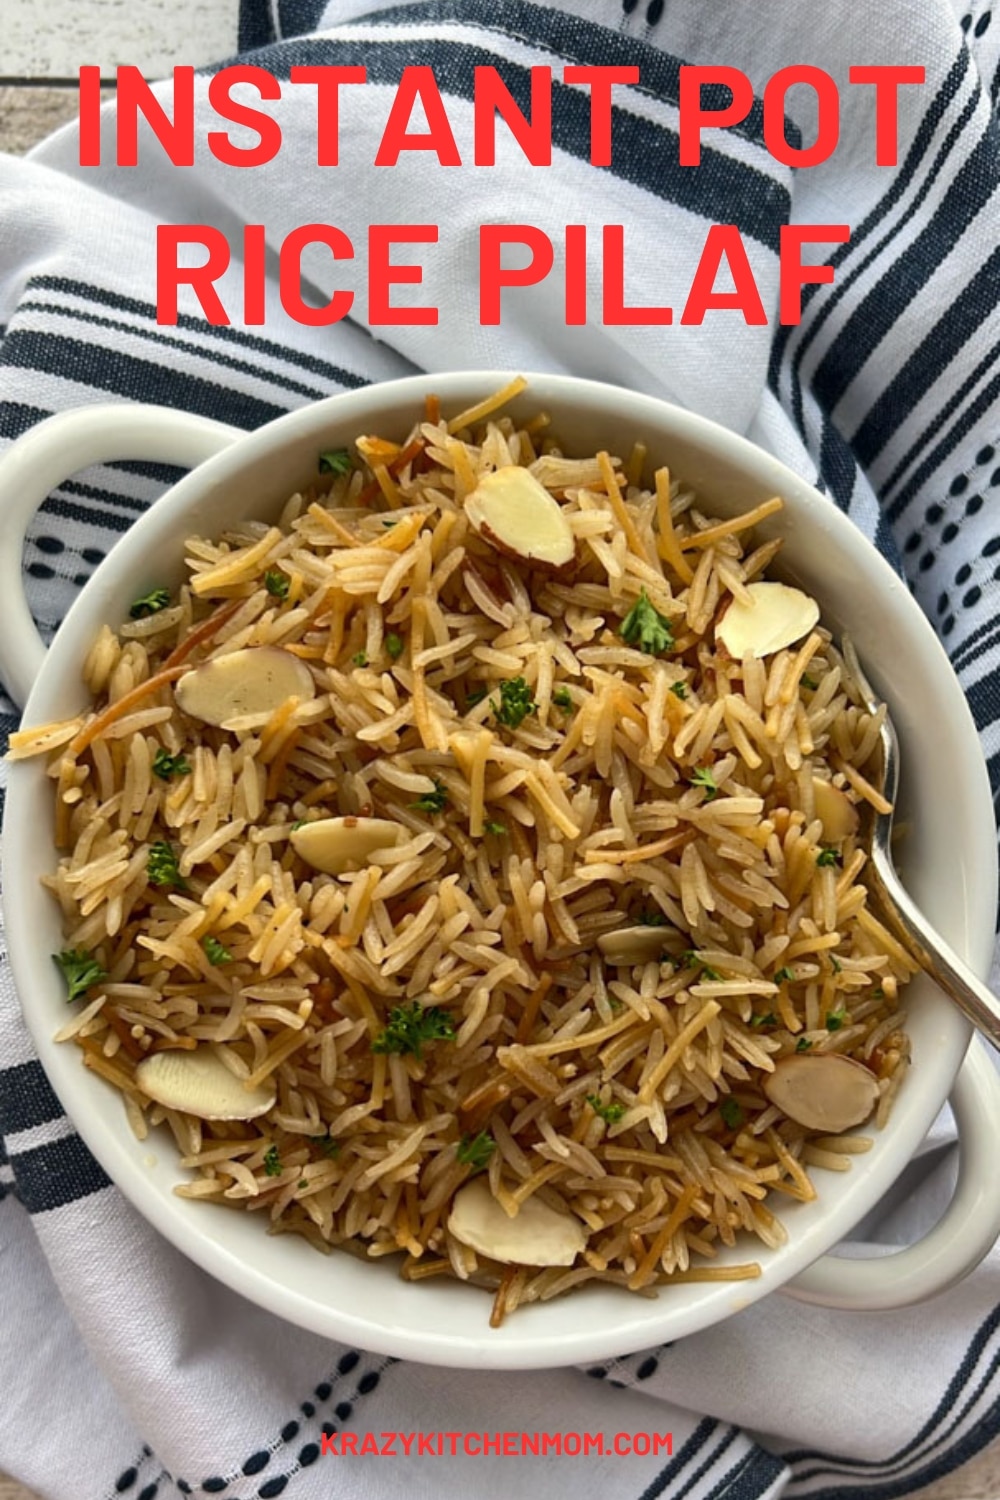 This one-pot nutty rice pilaf combines perfectly cooked rice with aromatic spices and nutty butter, delivering a fragrant and flavorful side dish that's both convenient and delicious. via @krazykitchenmom